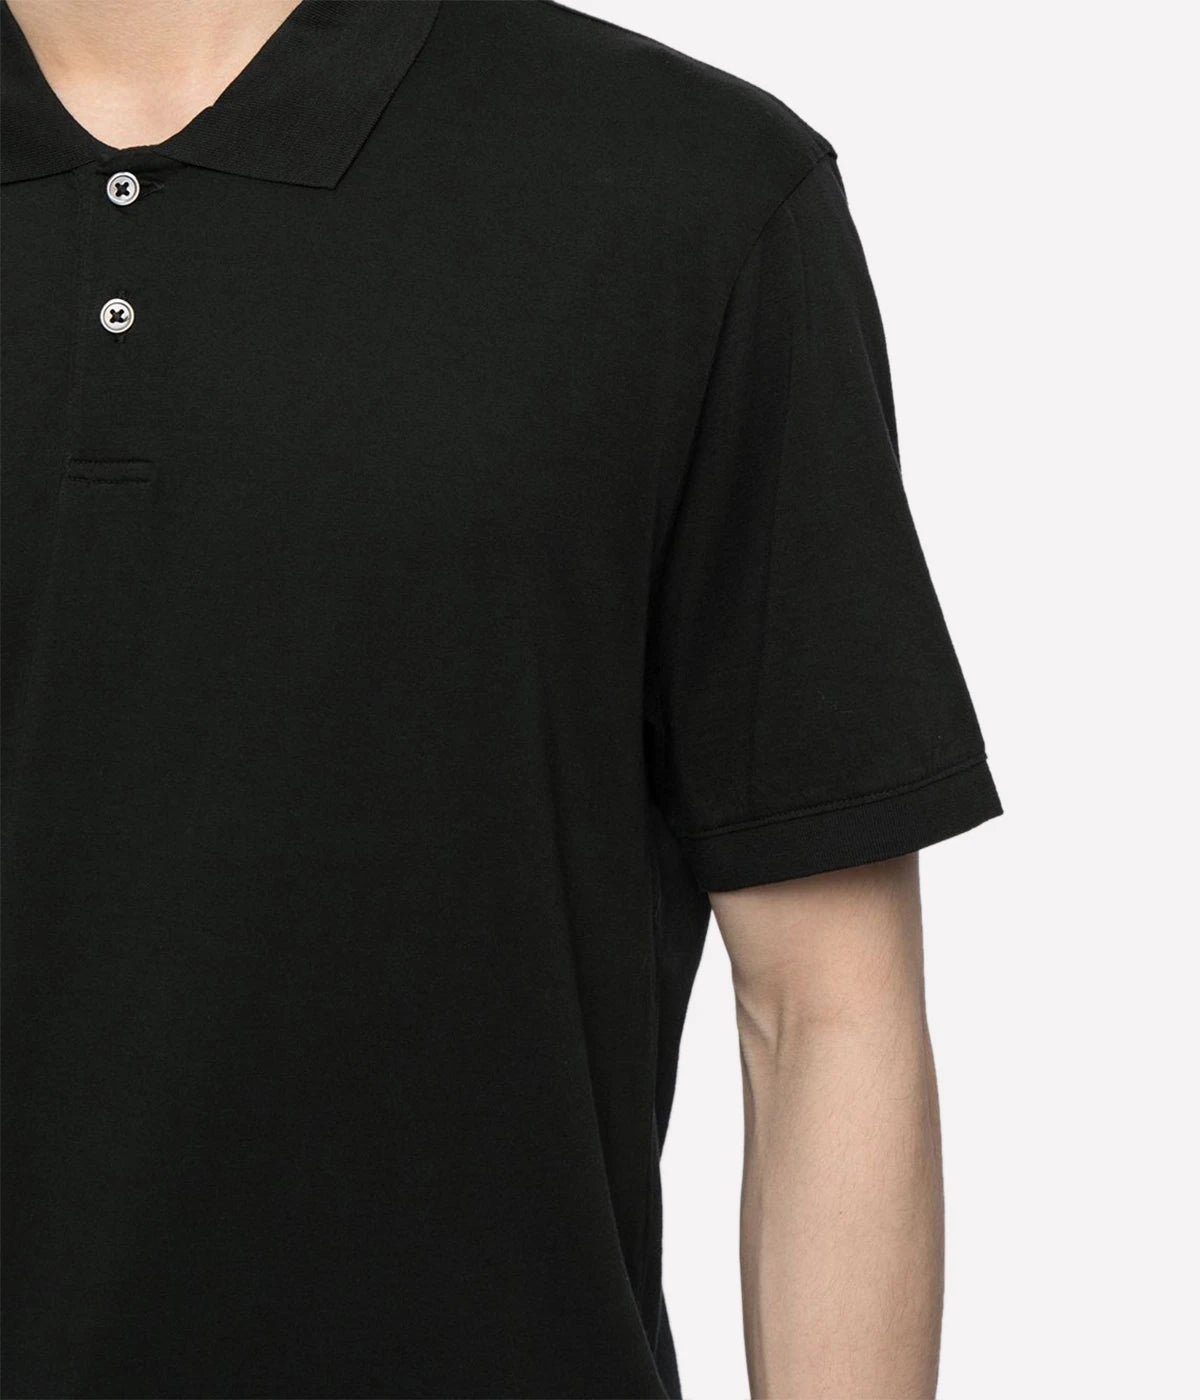 Detail shot of contrast ribbed knit collar and short sleeve hems and centre front polo placket with two button closure. A black relaxed polo shirt made of luxurious black jersey.